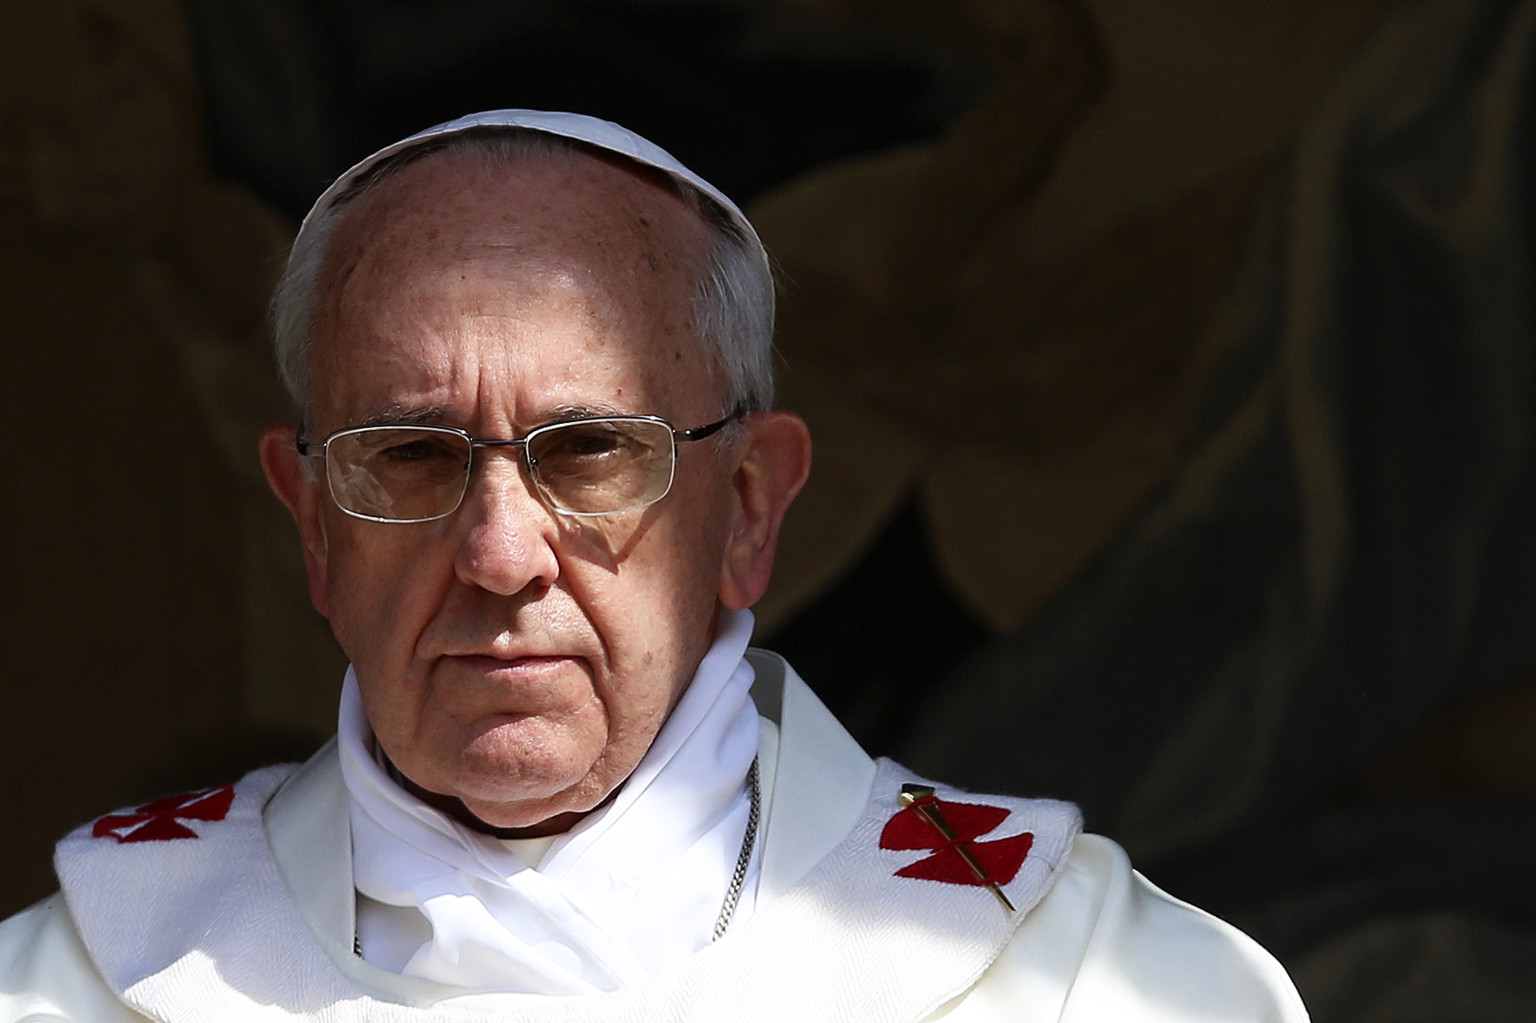 God Weeps Pope Francis Comes Face To Face With Church Sex Abuse Victims image